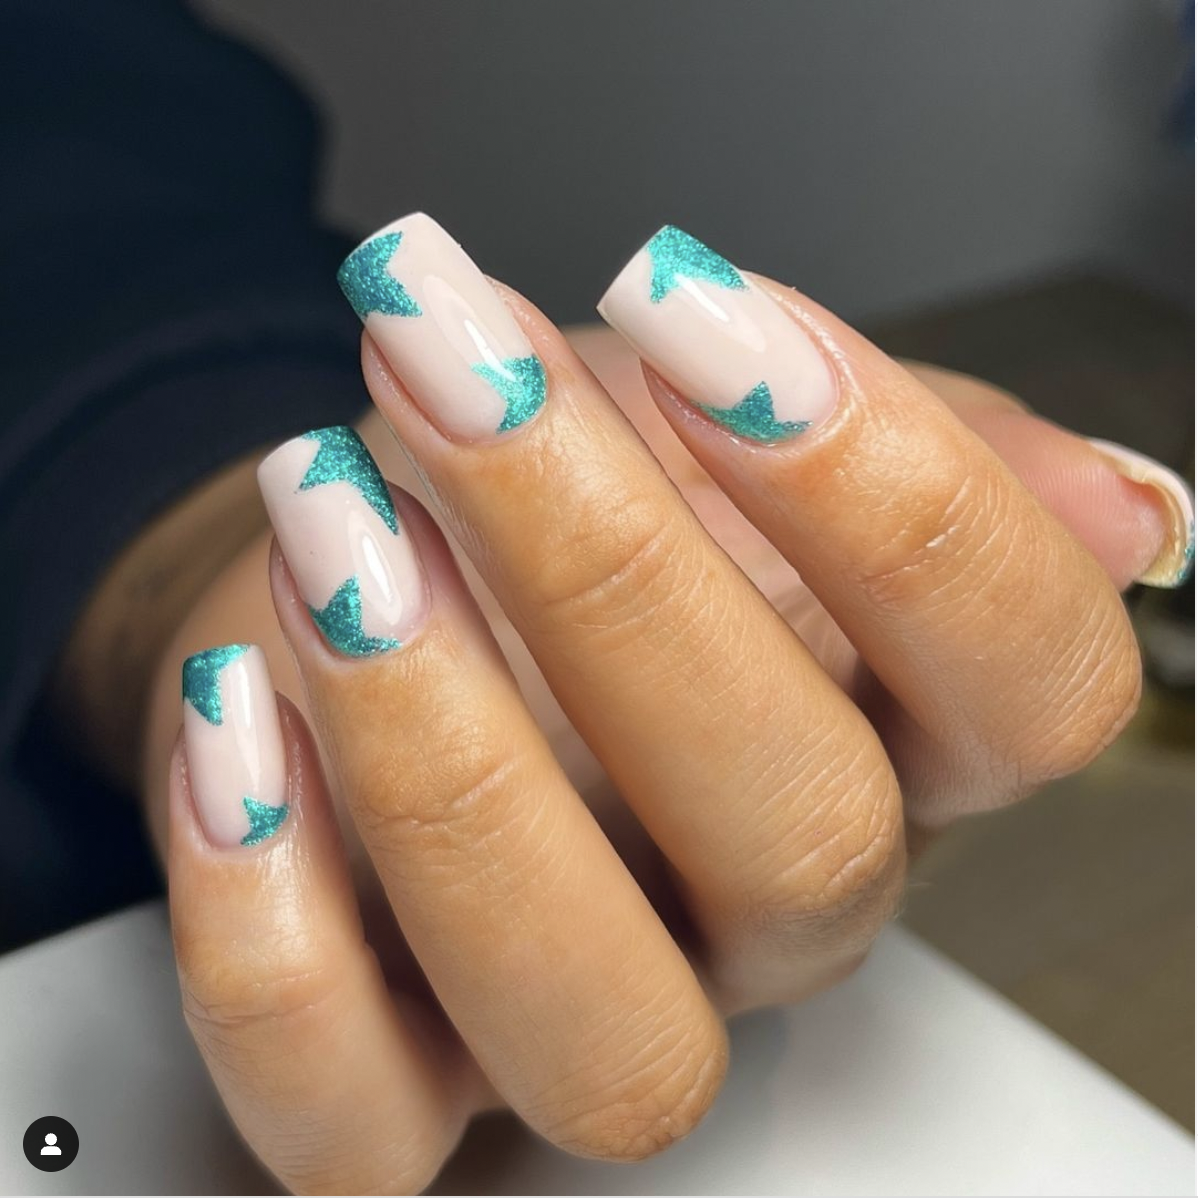 HG Nails - Cute design on short nails with builder gel (Biab) underneath.  Loving how my clients are wanting to grow their own natural nails long and  strong | Facebook